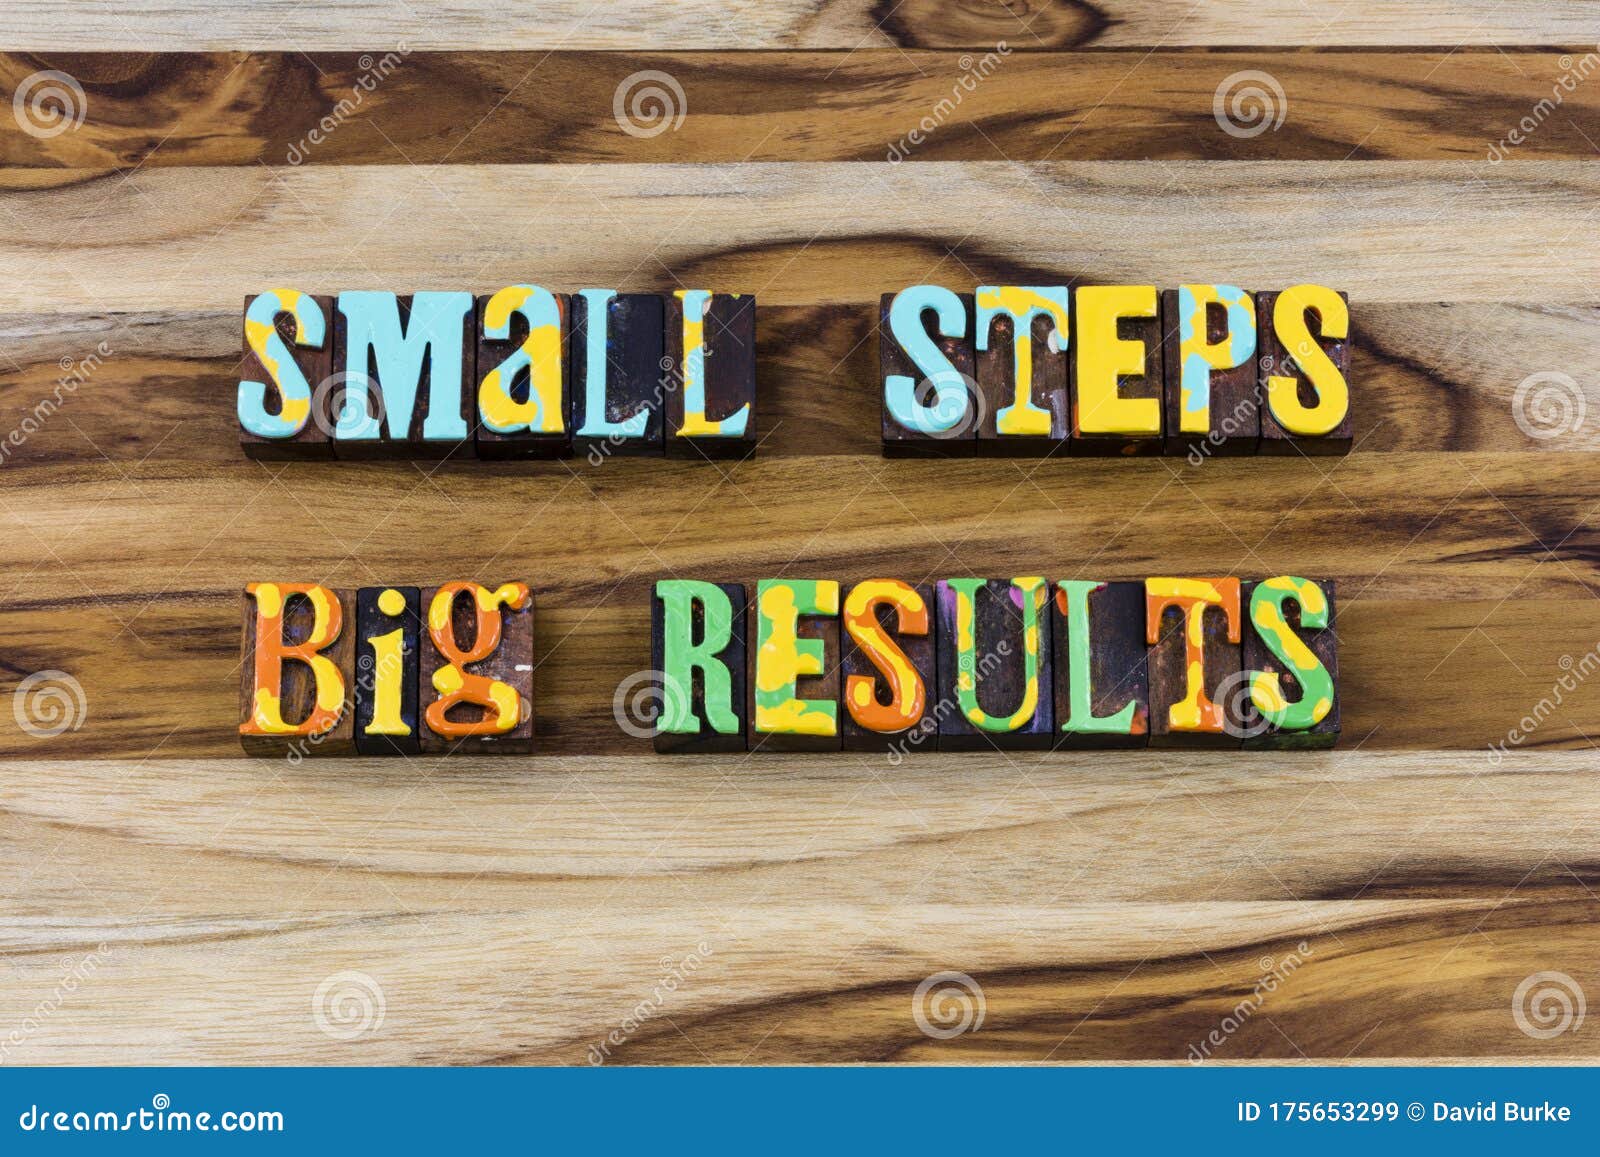 small steps create big results plan ahead perform accomplish success result